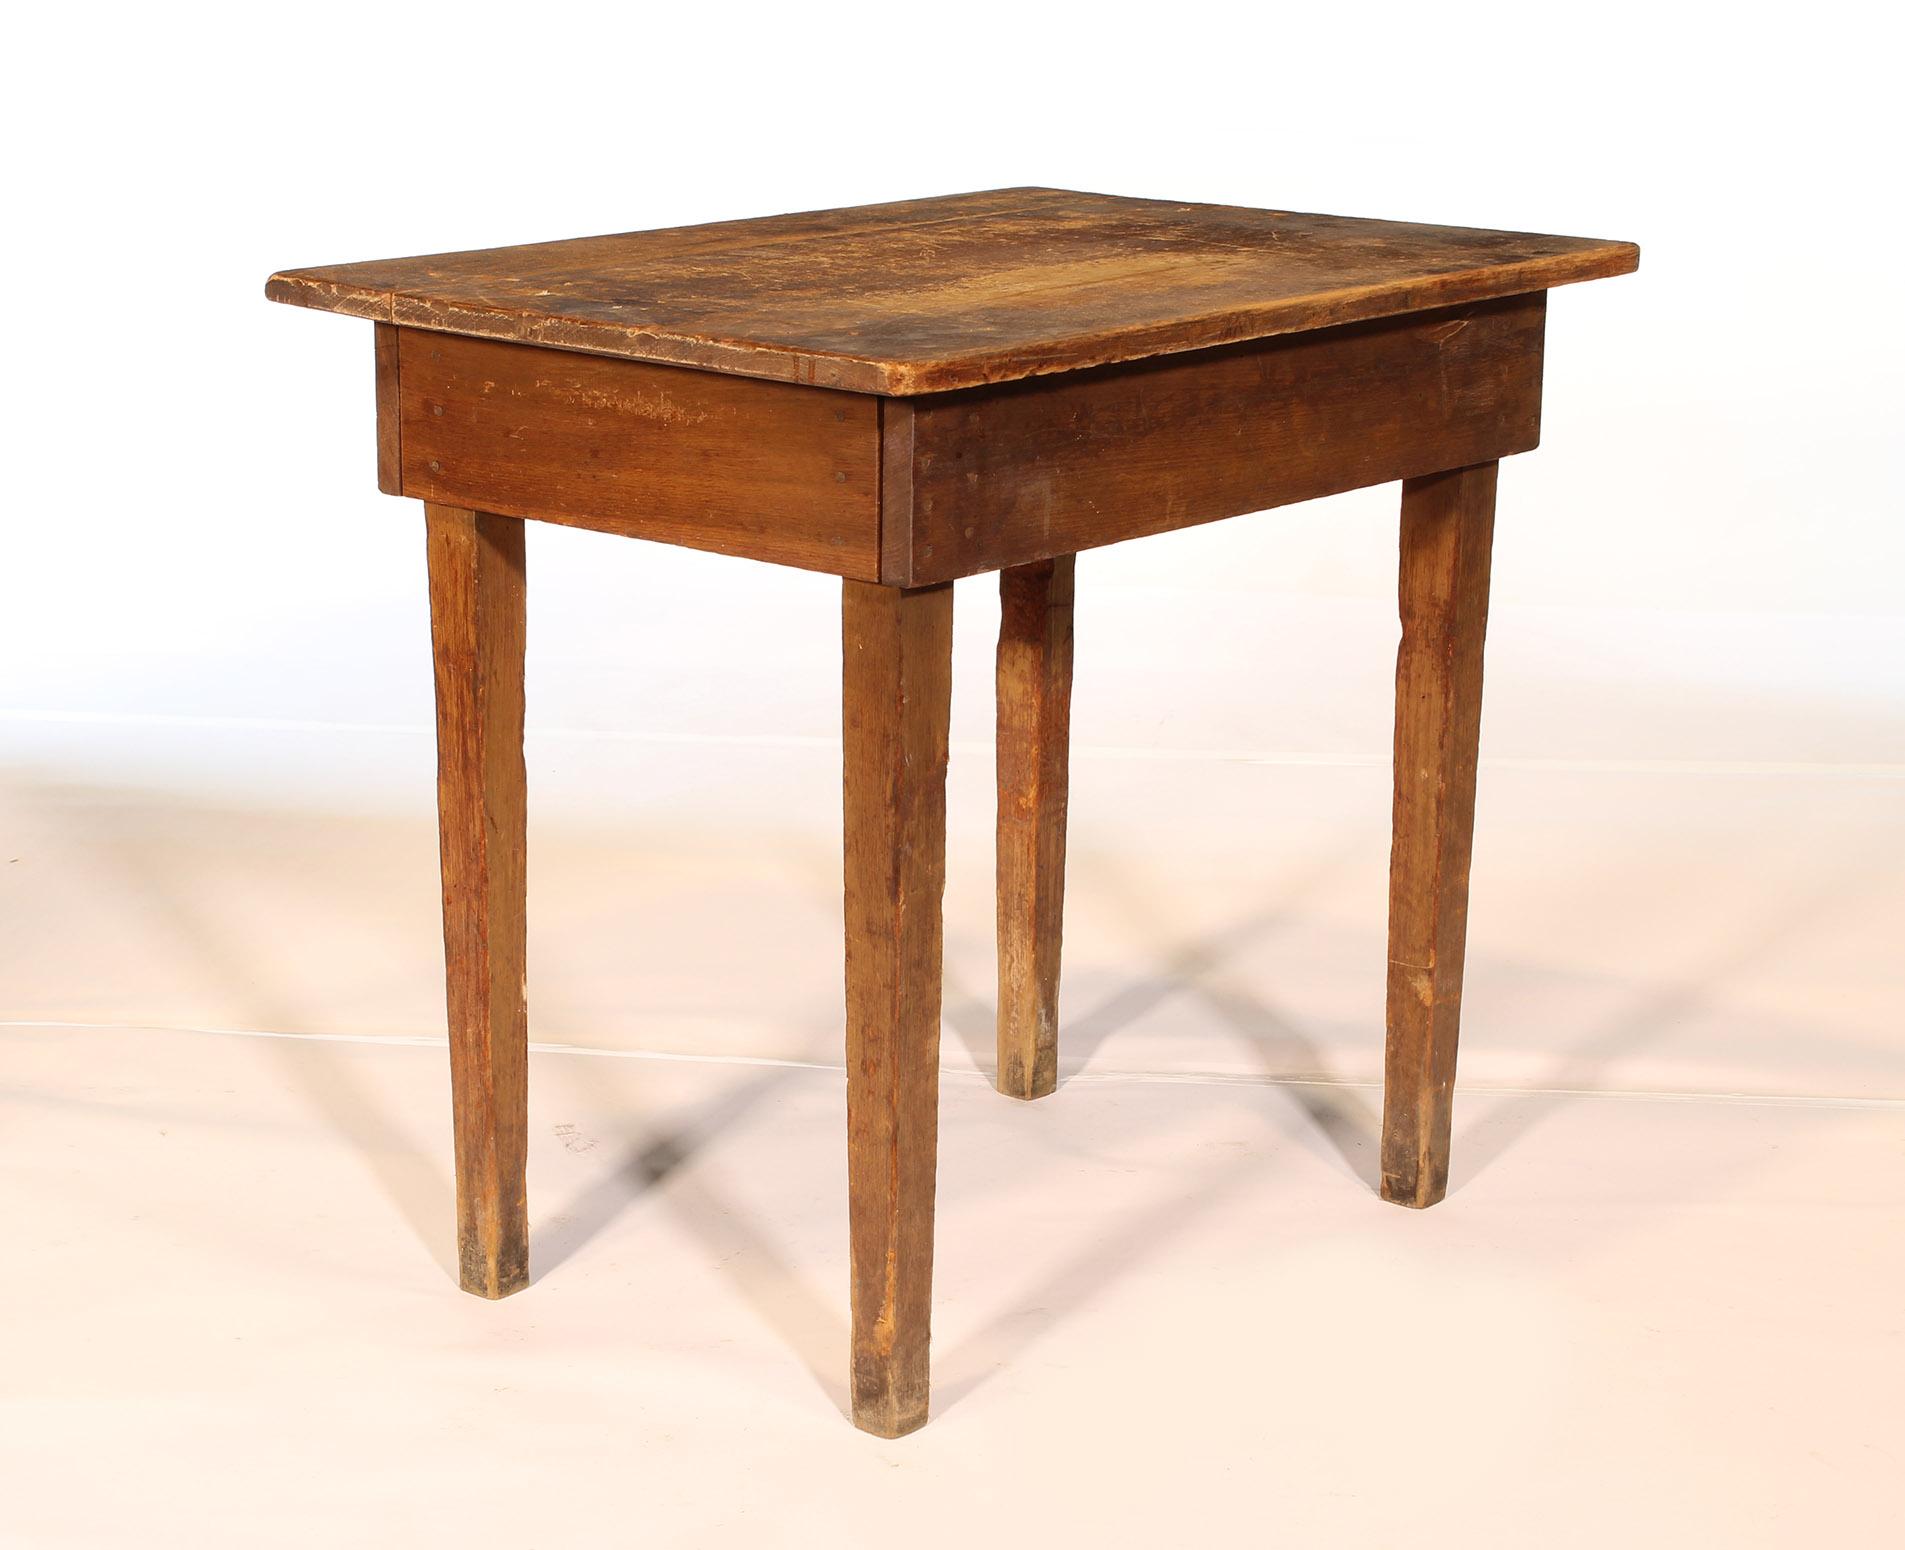 Primitive / Country Style Wooden School Desk / Table 1